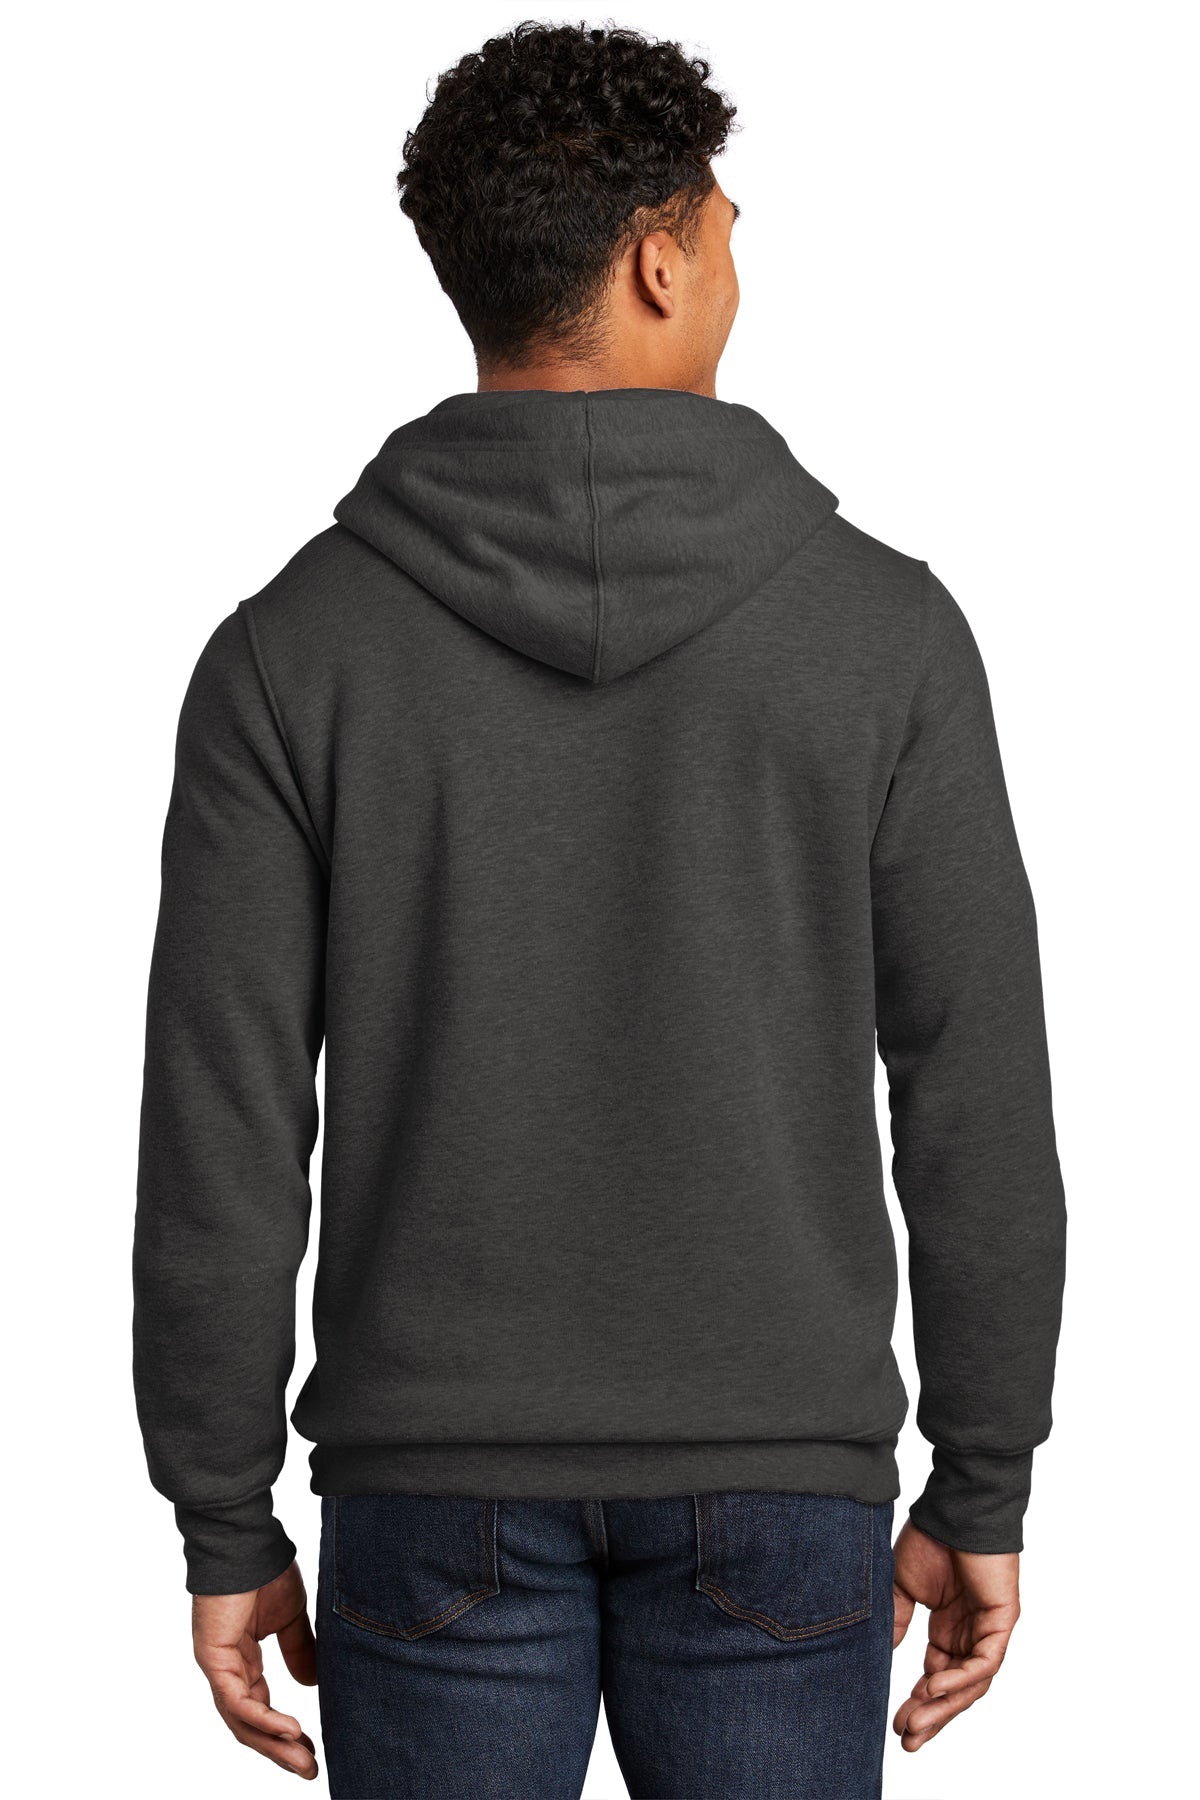 North Face Chest Logo Hoodie NF0A7V9B TNF Black Heather